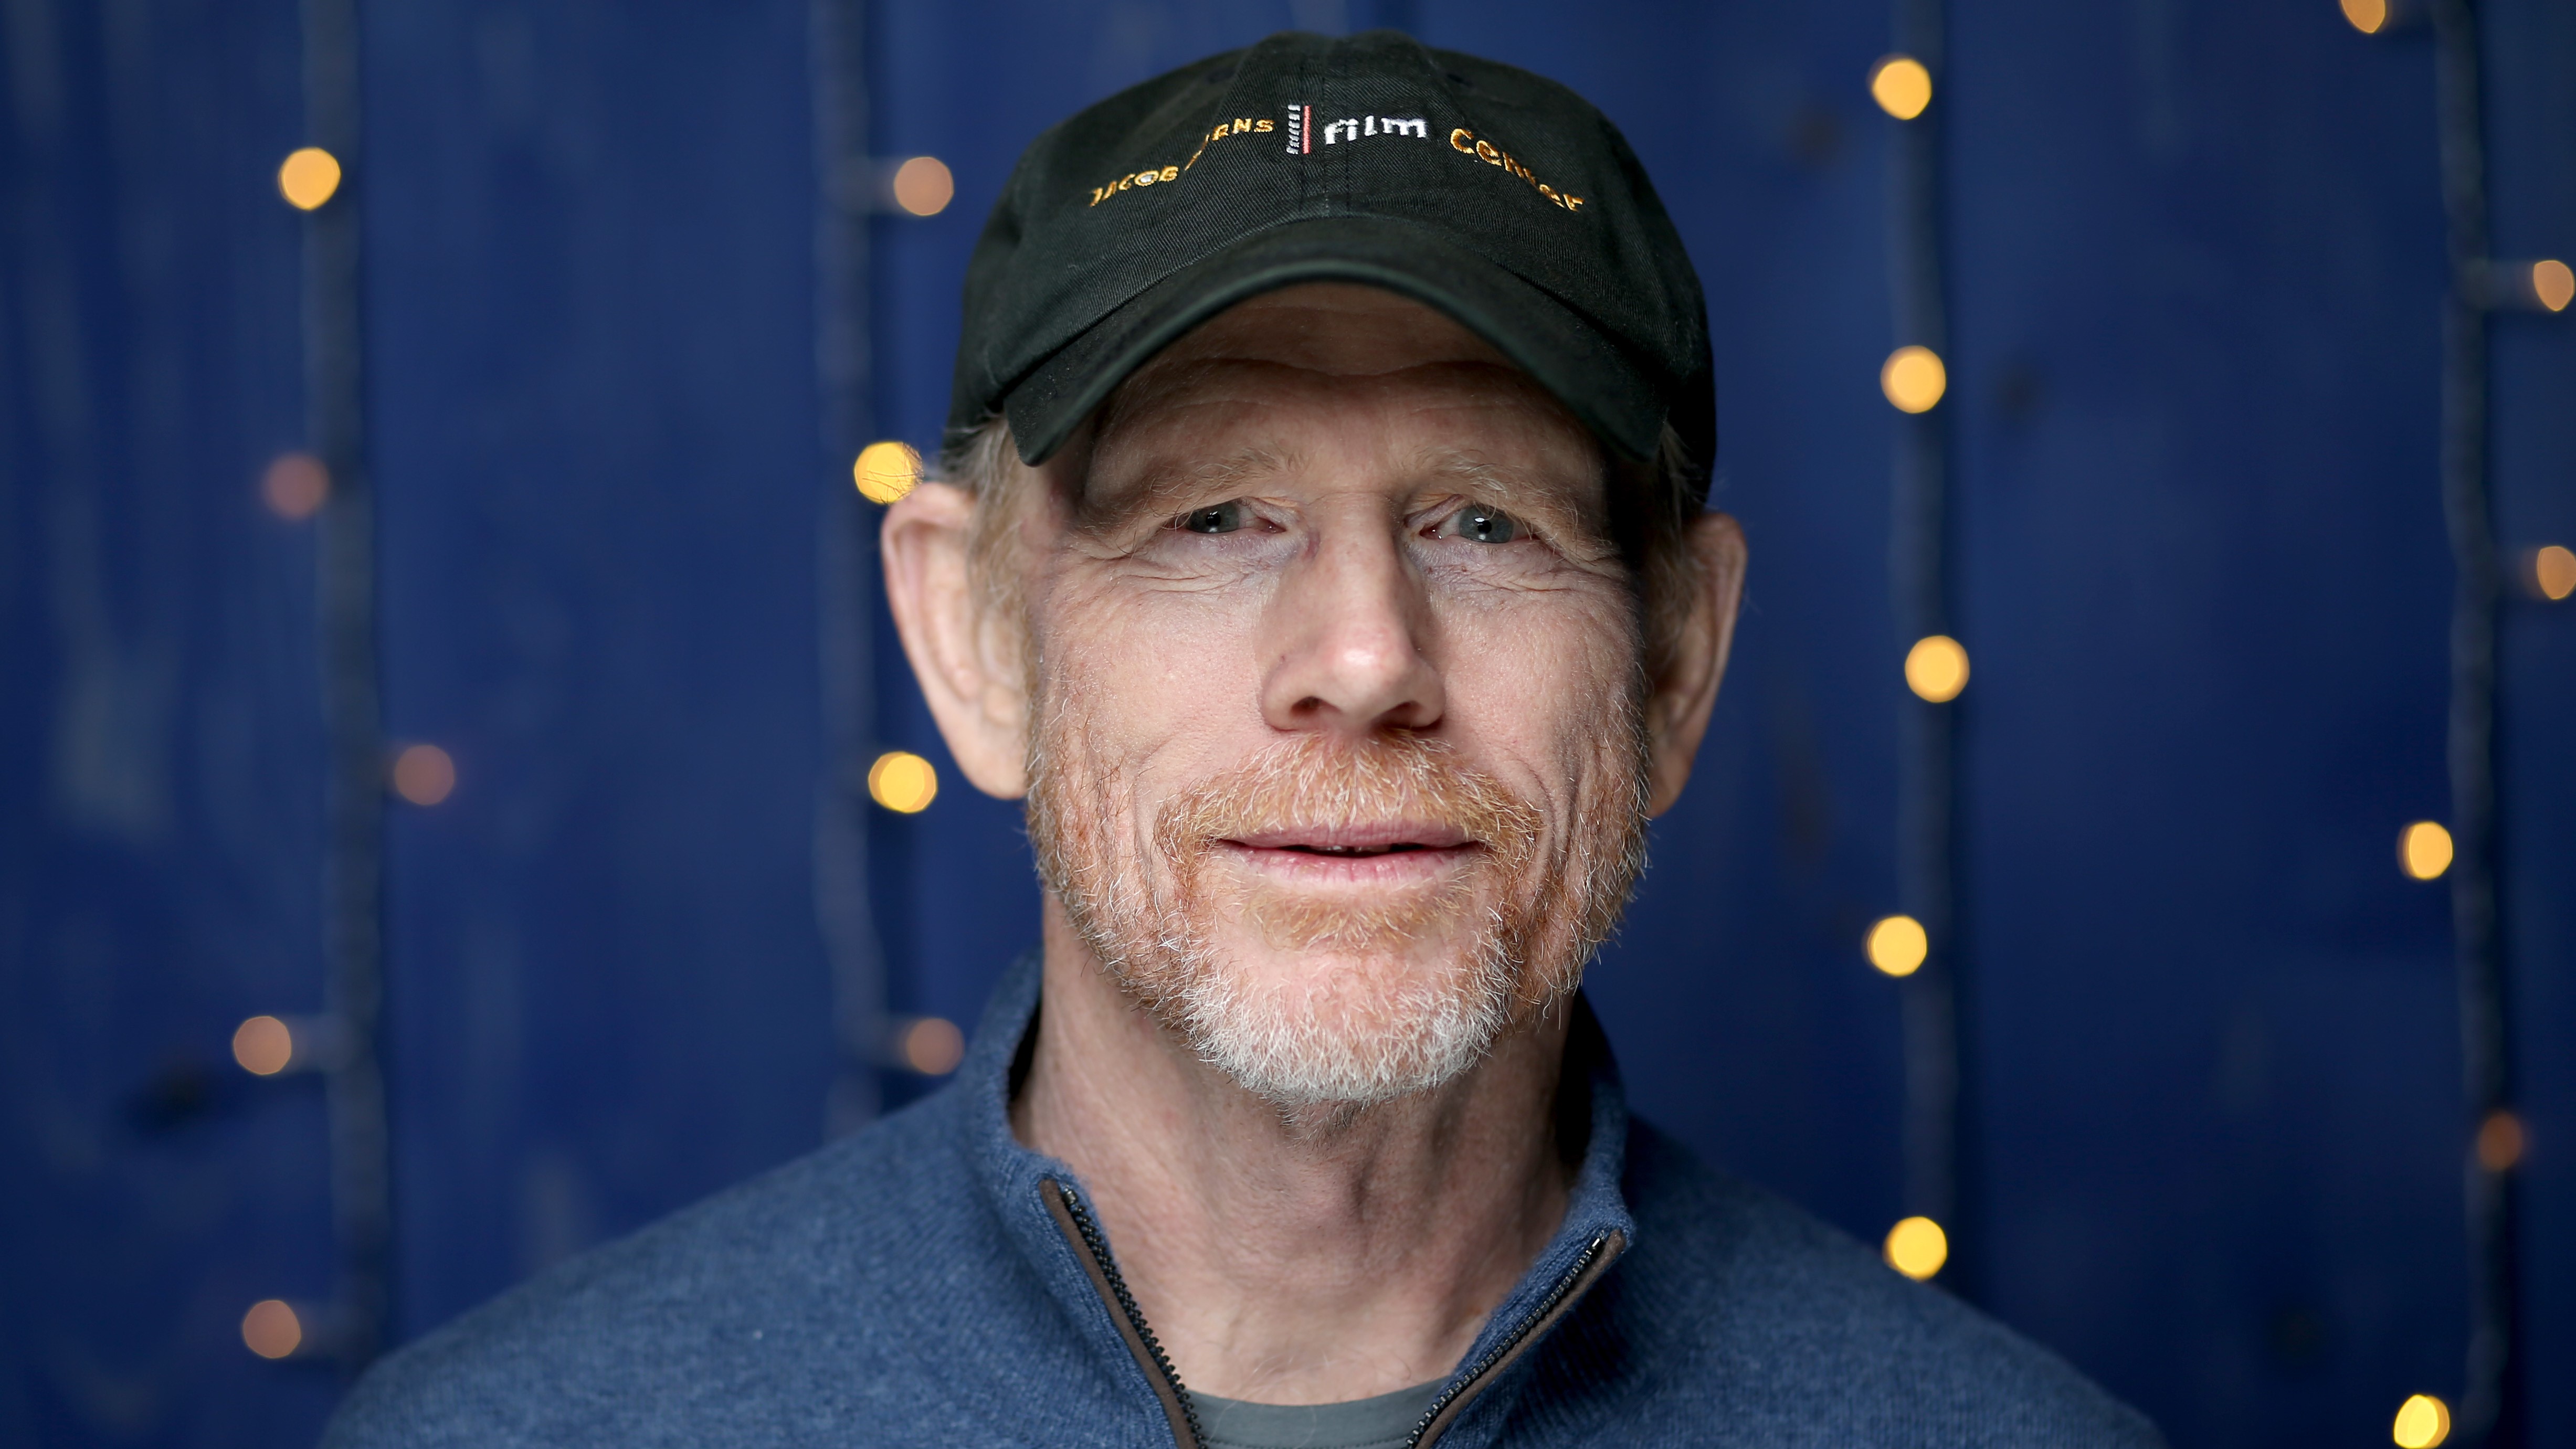 Contact Ron Howard [Address, Email, Phone, DM, Fan Mail]